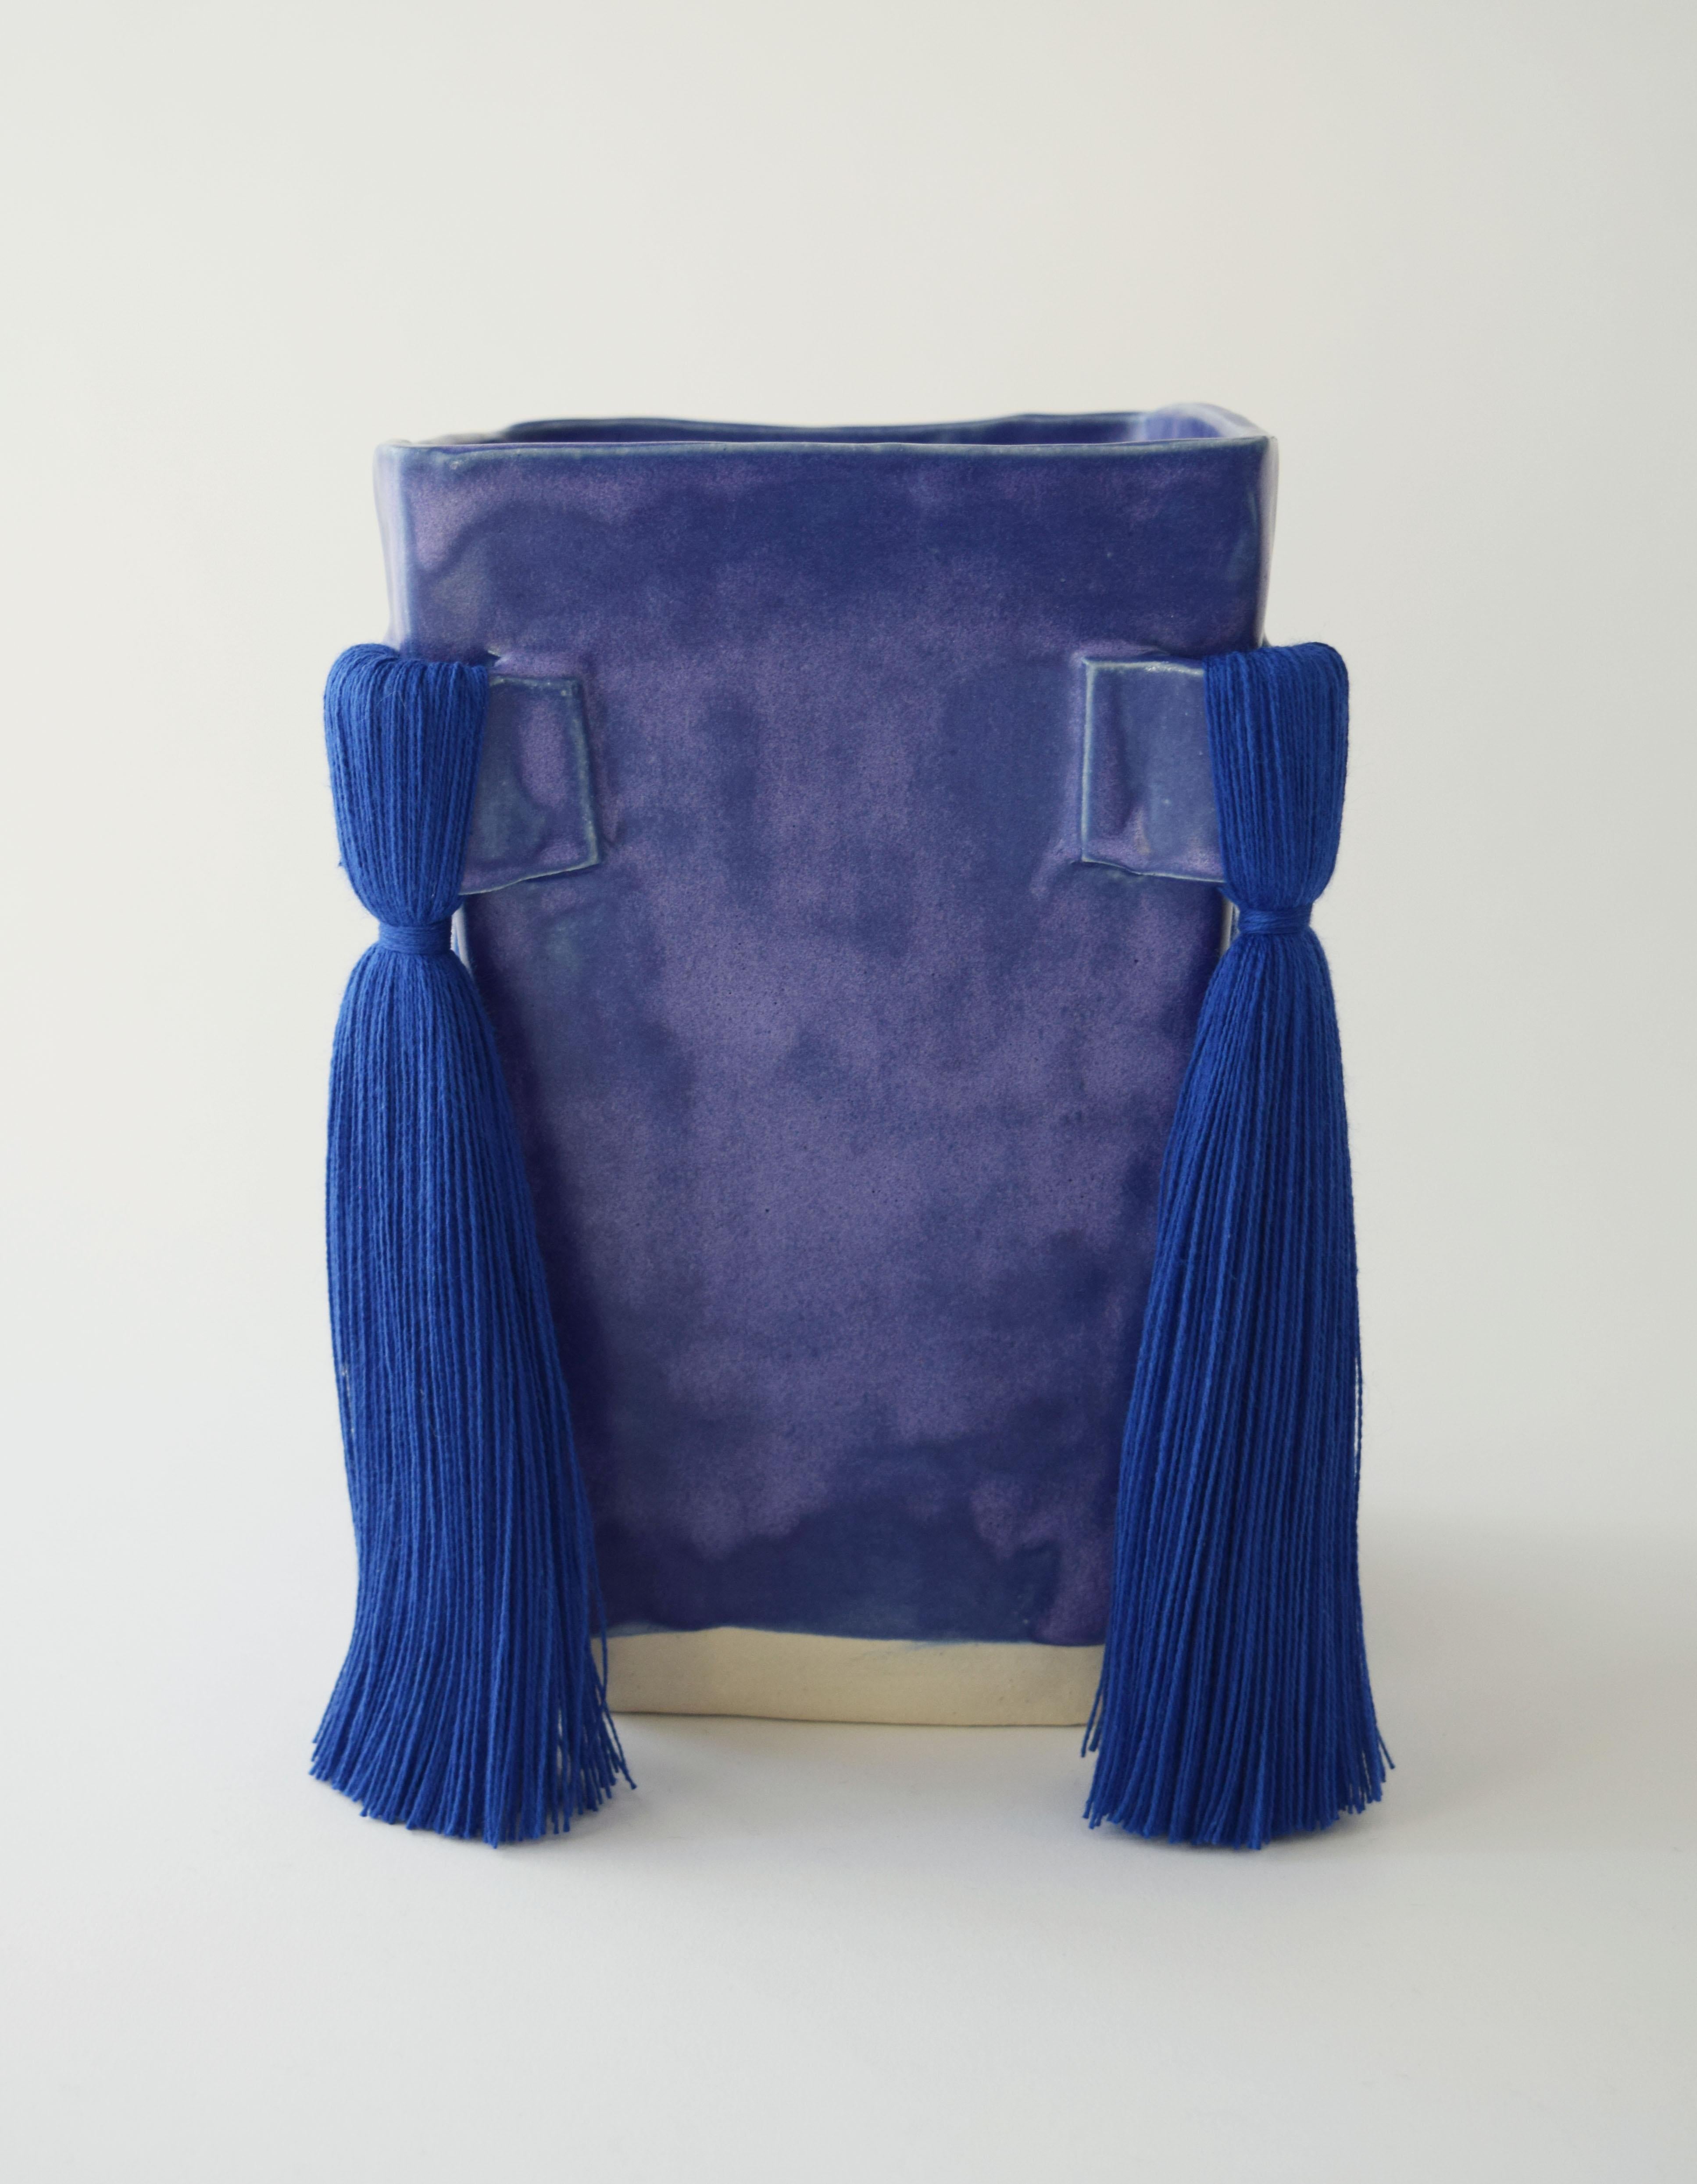 Vase #640 by Karen Gayle Tinney

Hand formed stoneware vase with satin blue glaze on outside and inside. Cobalt blue cotton fringe. Vessel will hold water but care should be taken not to damage fiber areas. Vase ships with a small comb for fringe.